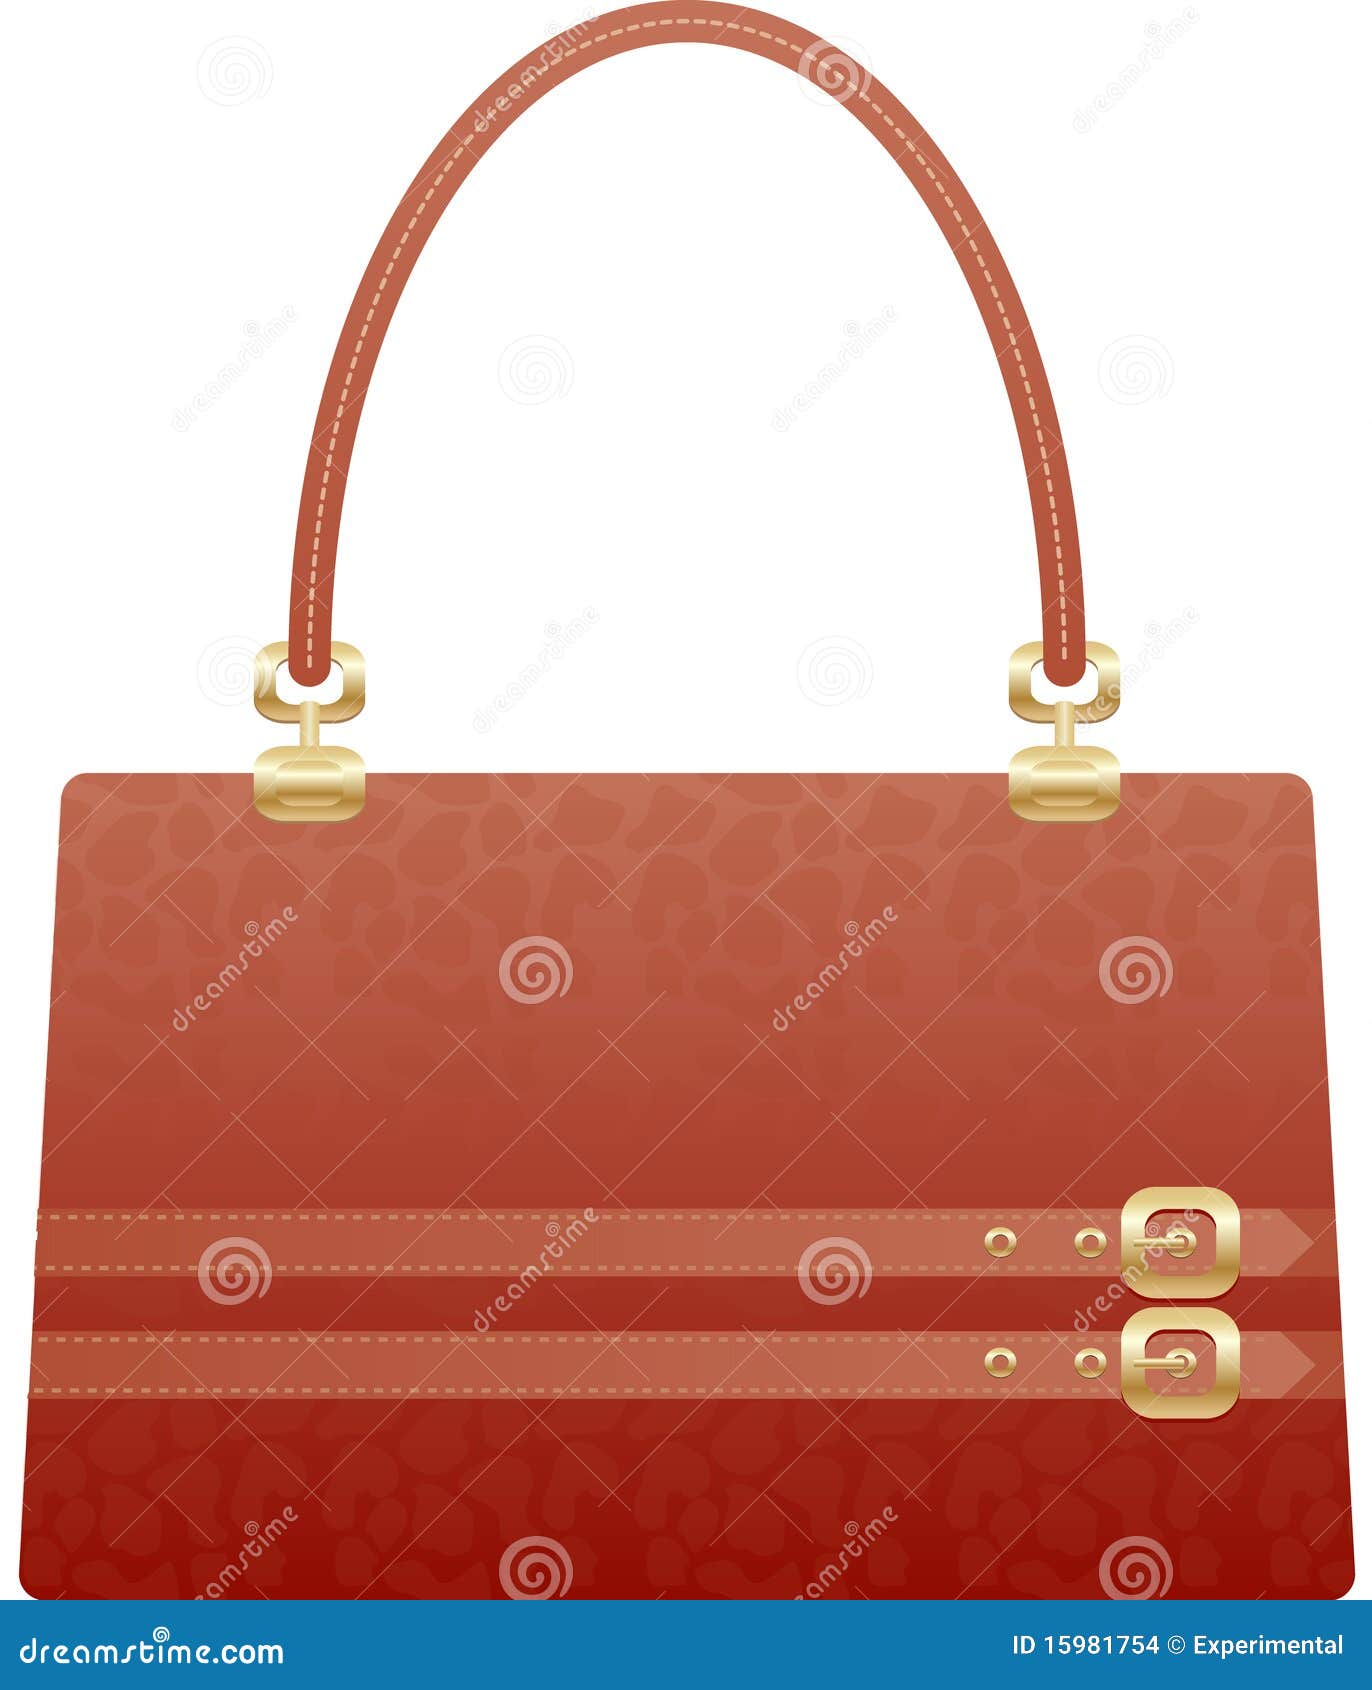 Red Purse vector clipart image - Free stock photo - Public Domain photo -  CC0 Images